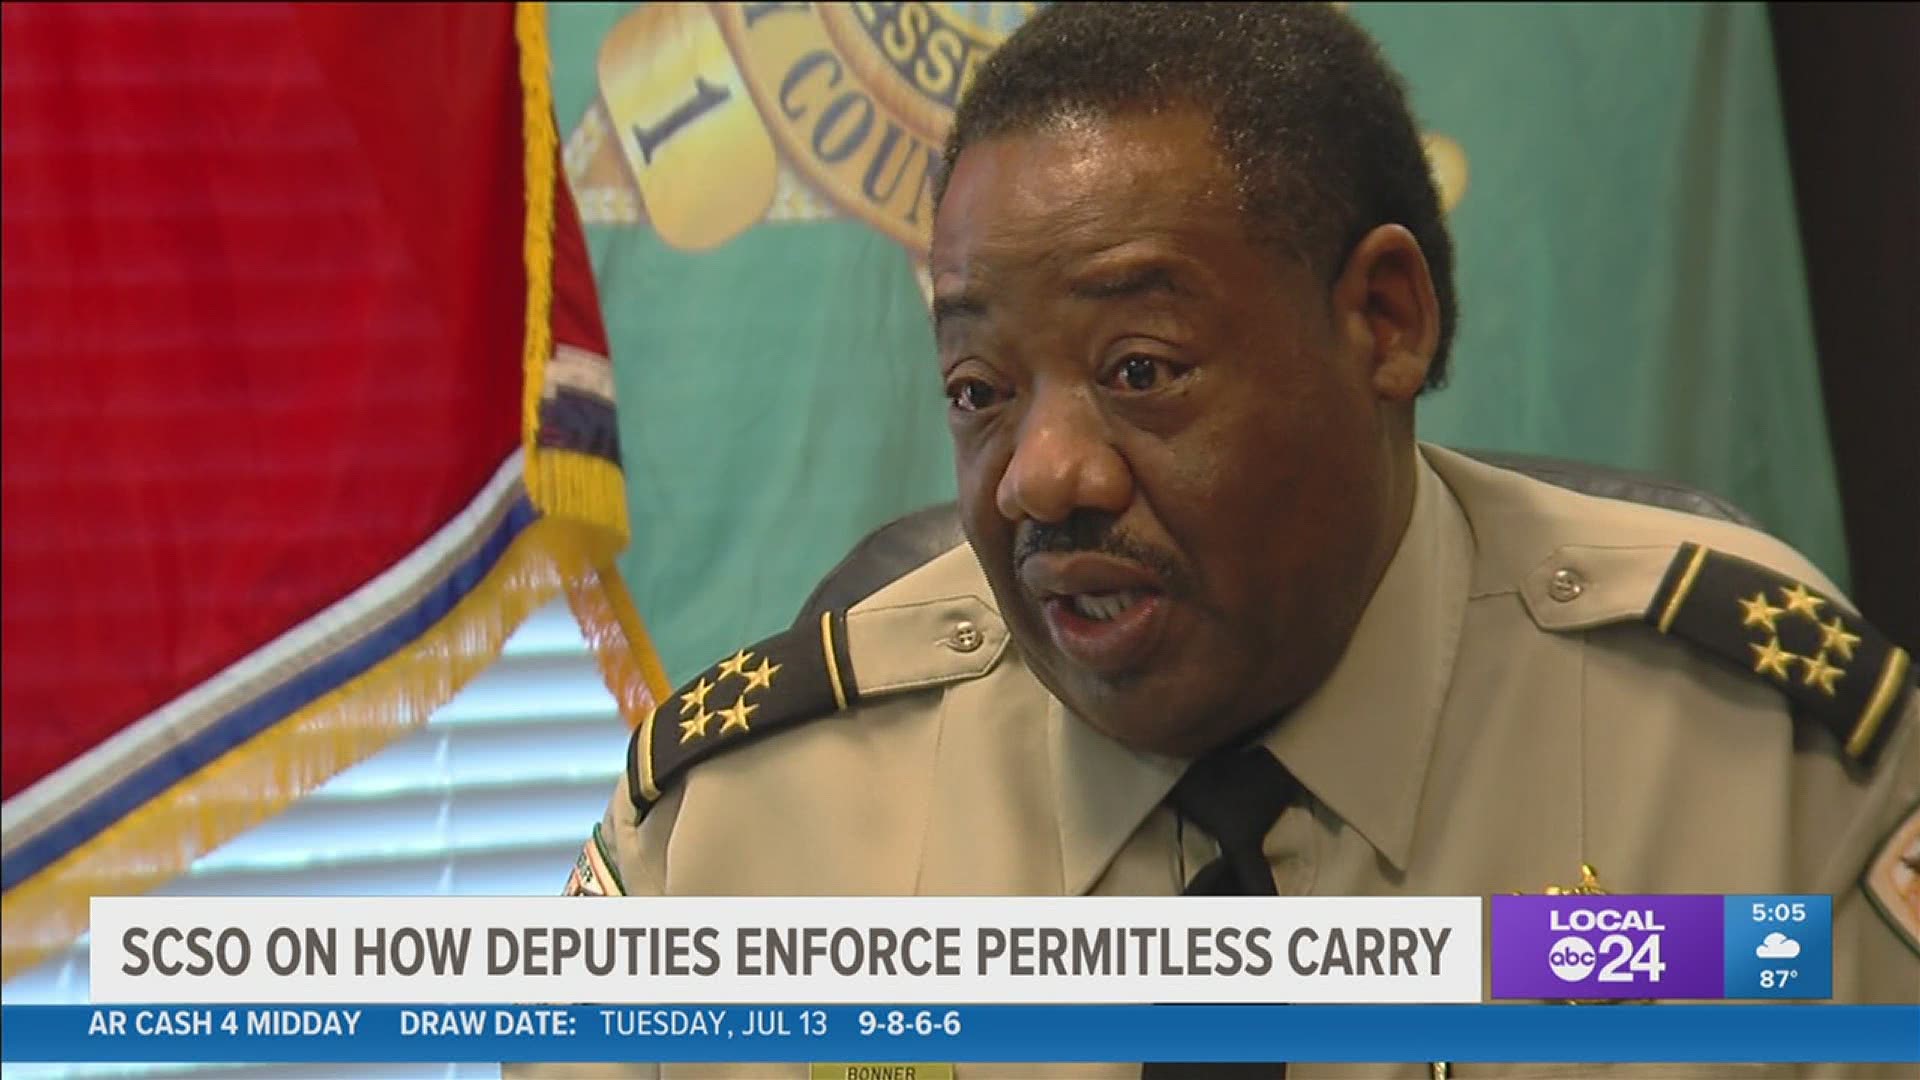 Sheriff Bonner outlined what the department is doing to help deputies and the public understand the new law.